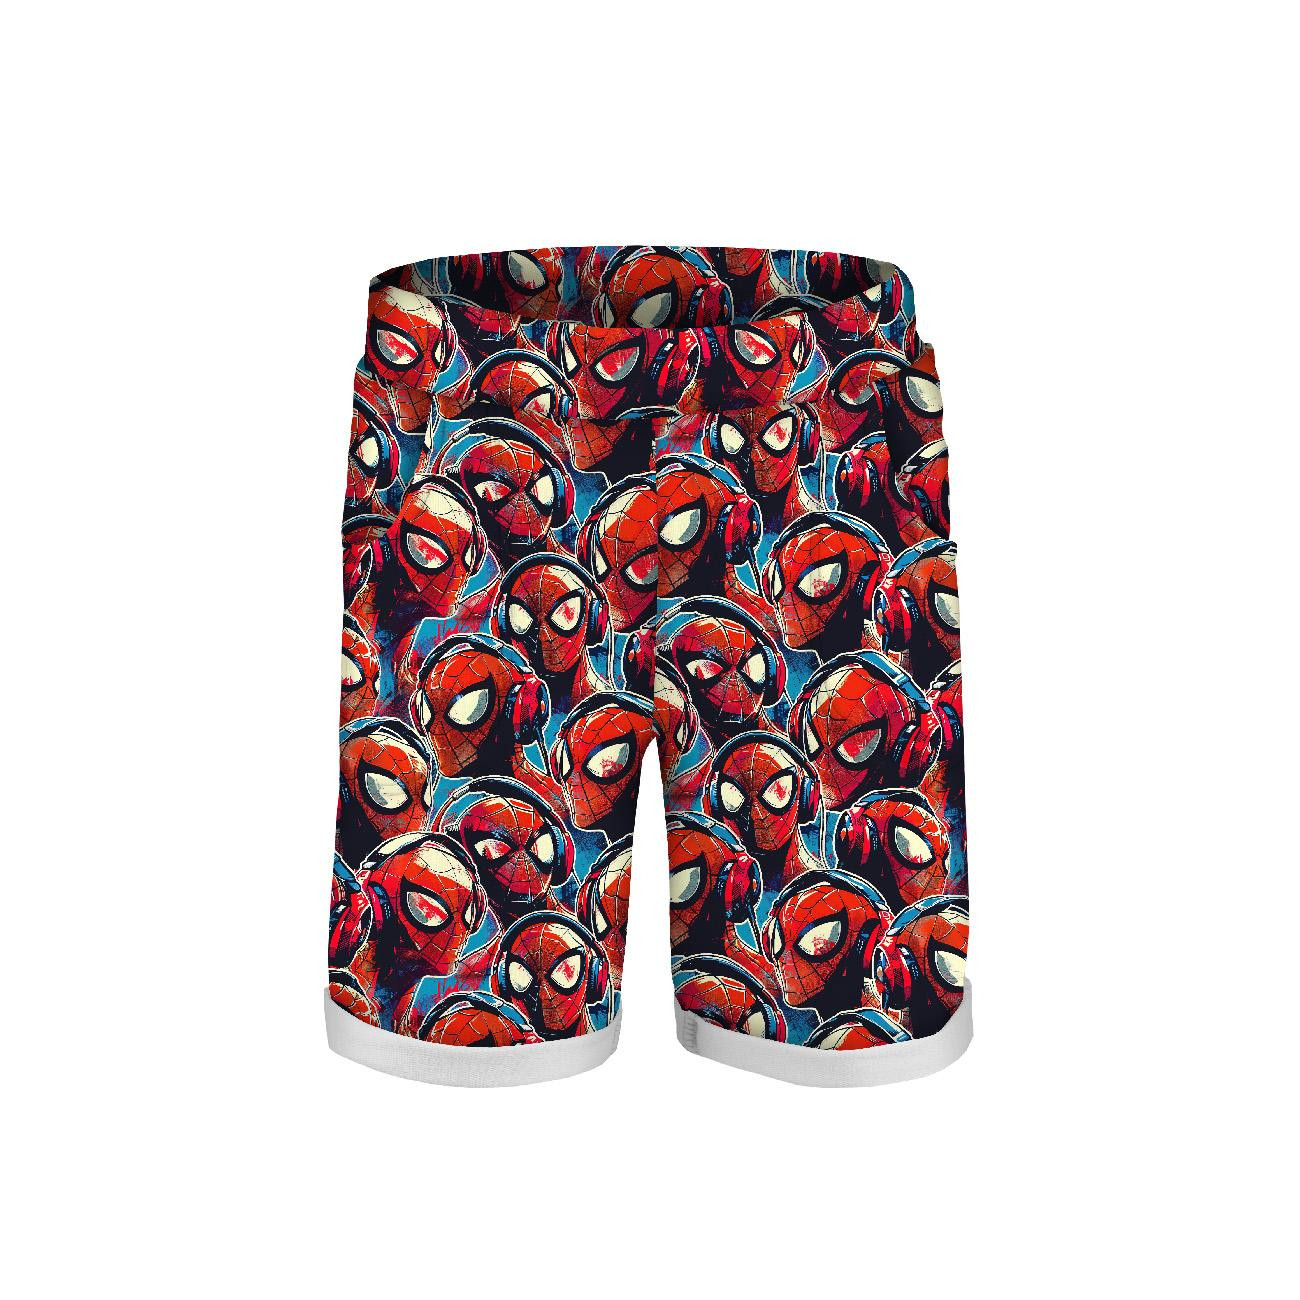 KID`S SHORTS (RIO) - SPIDER - looped knit fabric 